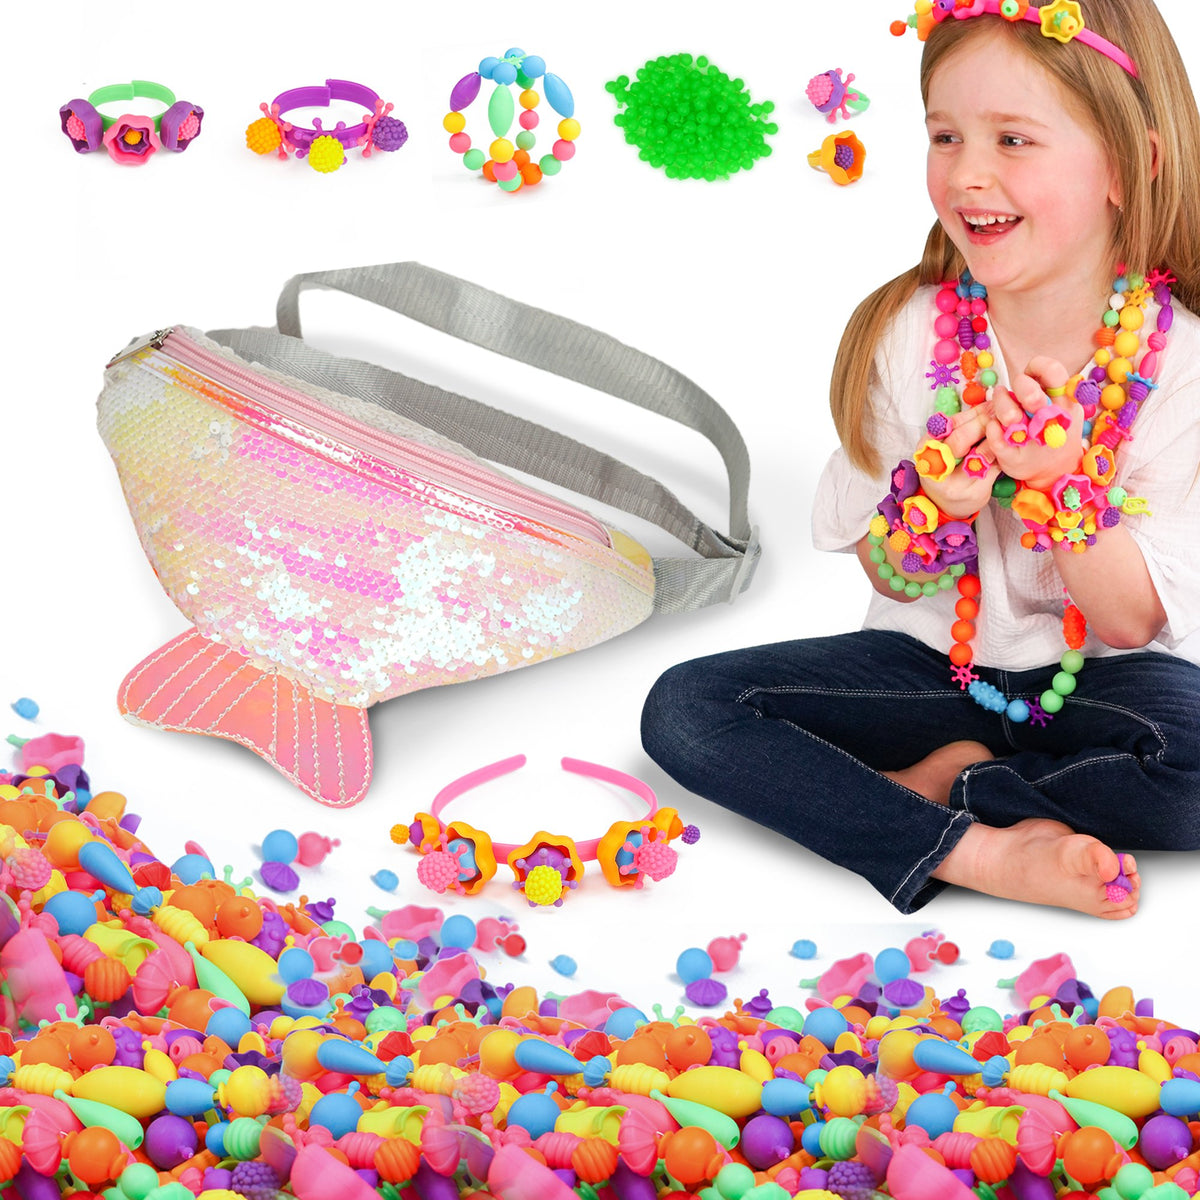 Snap Pop Beads Girls Toy - Happytime 180 Pieces DIY Jewelry Kit Fashion Fun for Necklace Ring Bracelet Art Crafts Gifts Toys for Kids Girls